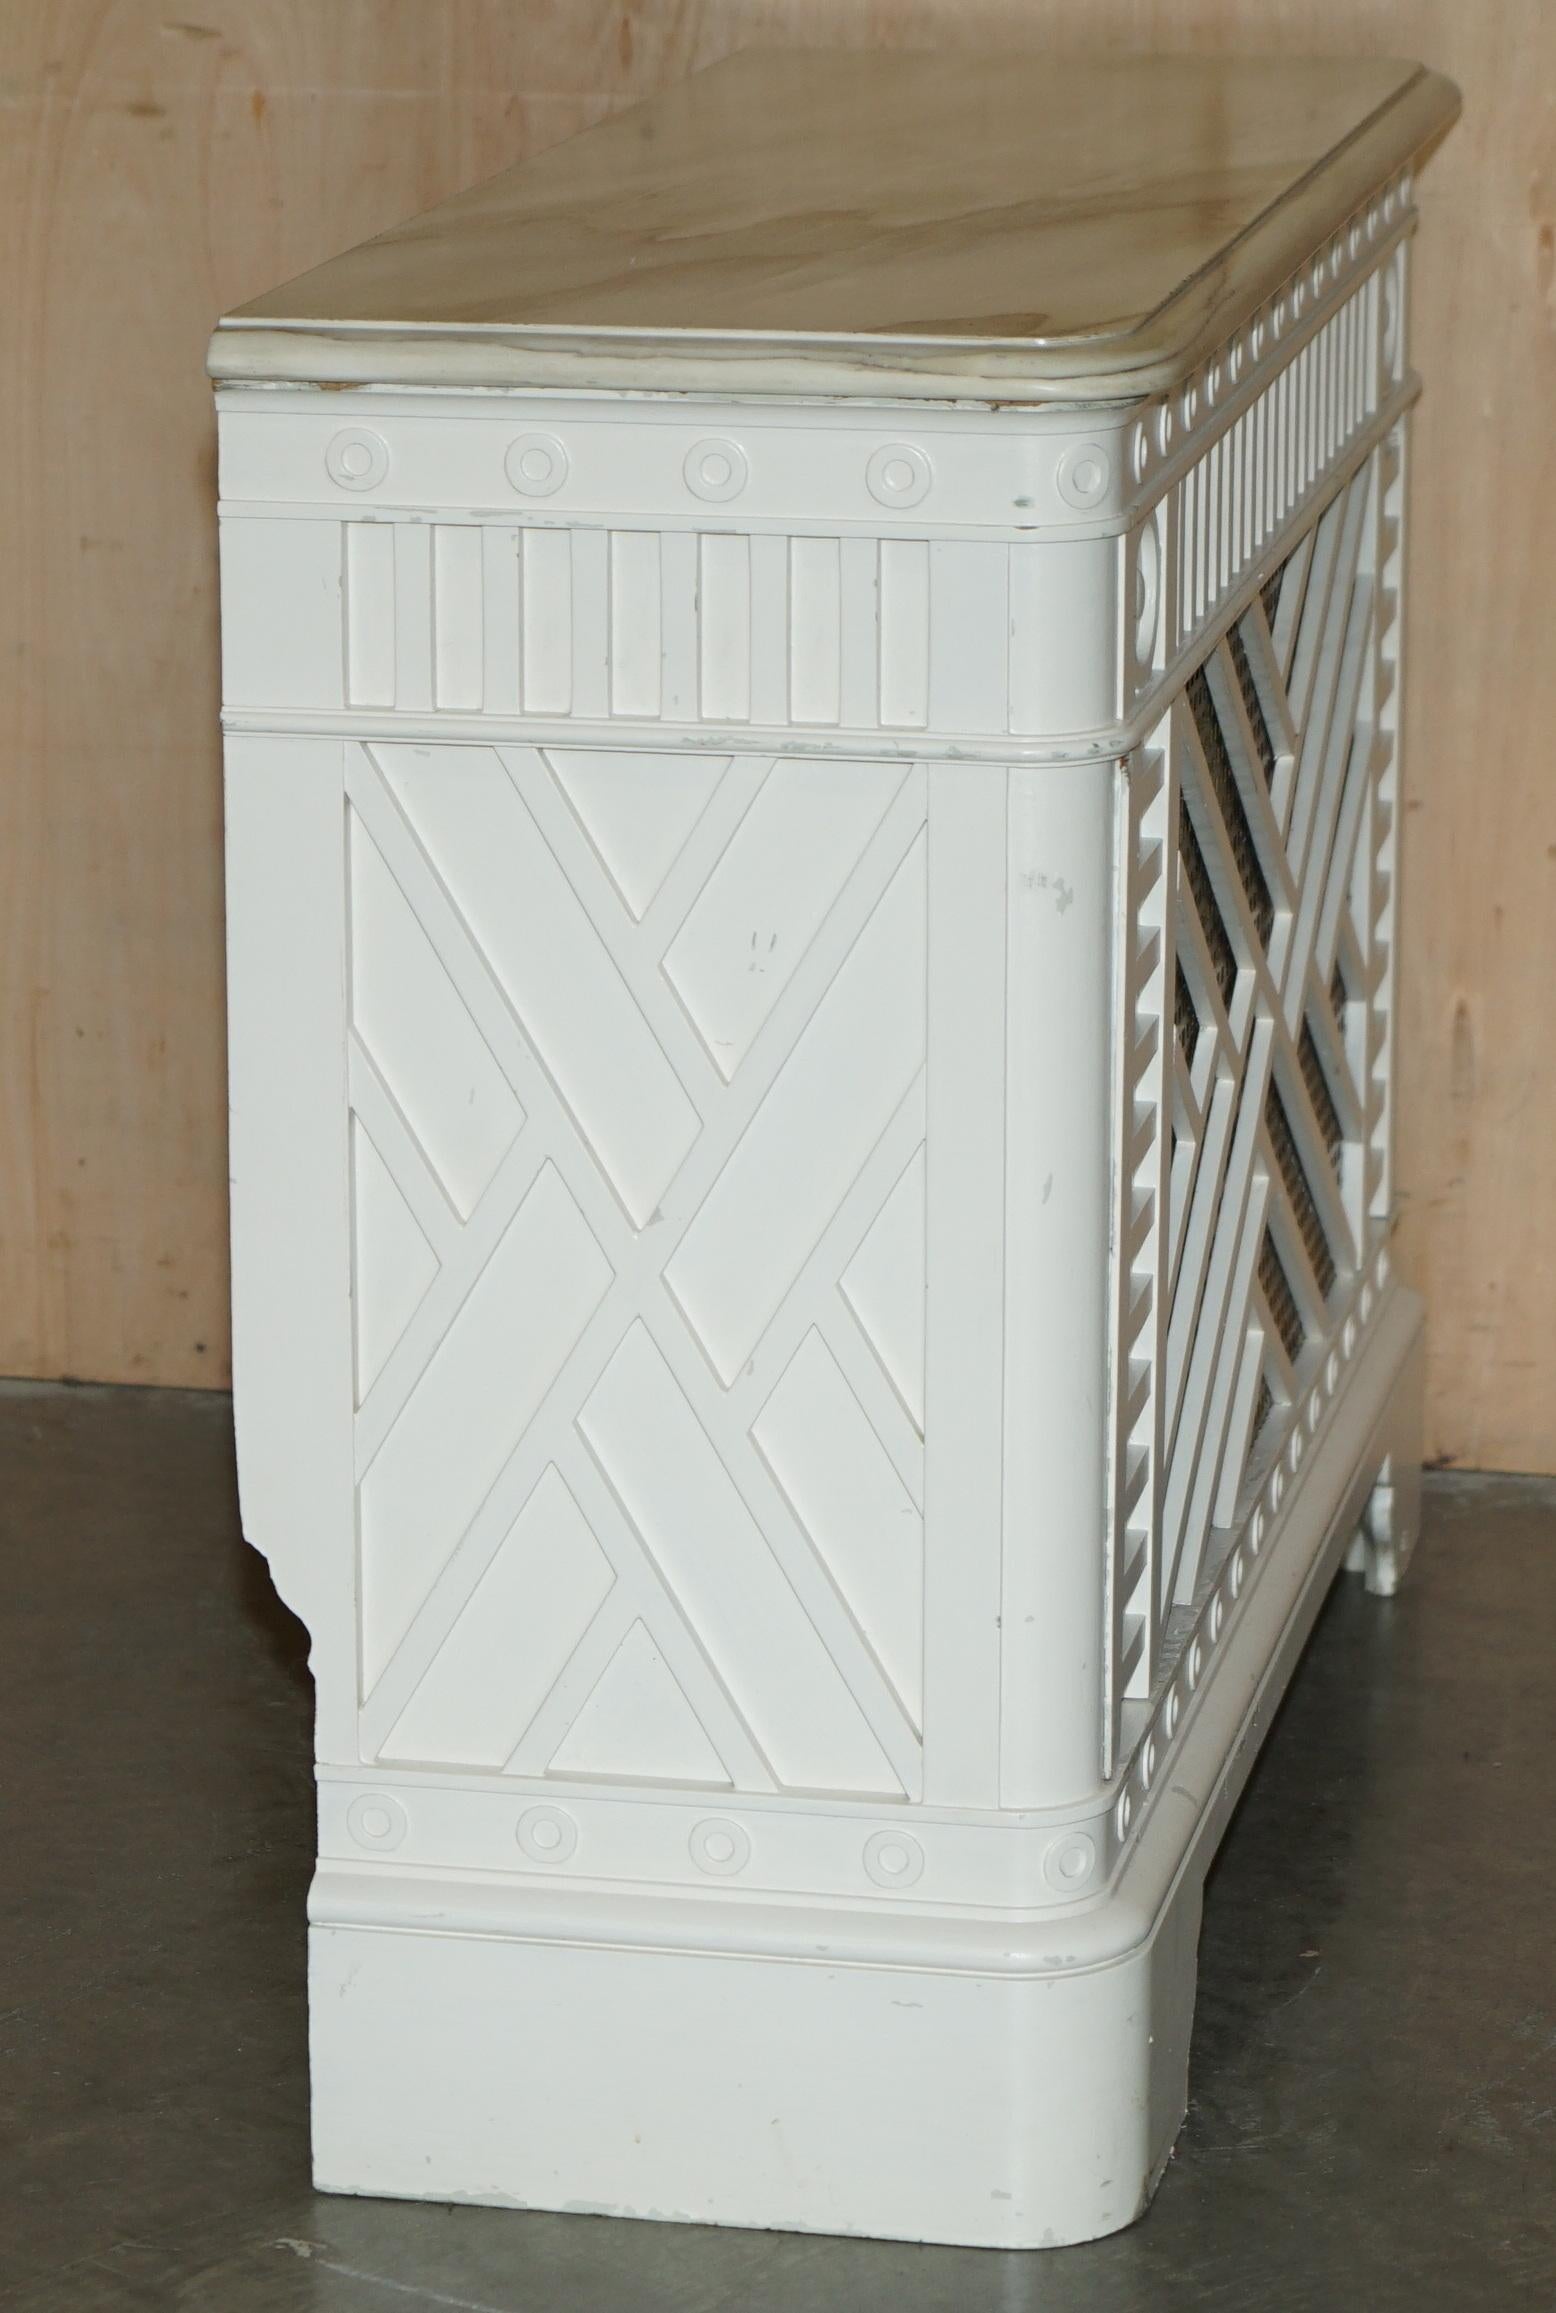 PAIR OF ViNTAGE ITALIAN CARRARA MARBLE TOPPED RADIATOR COVERS REMOVABLE FRONTS For Sale 2